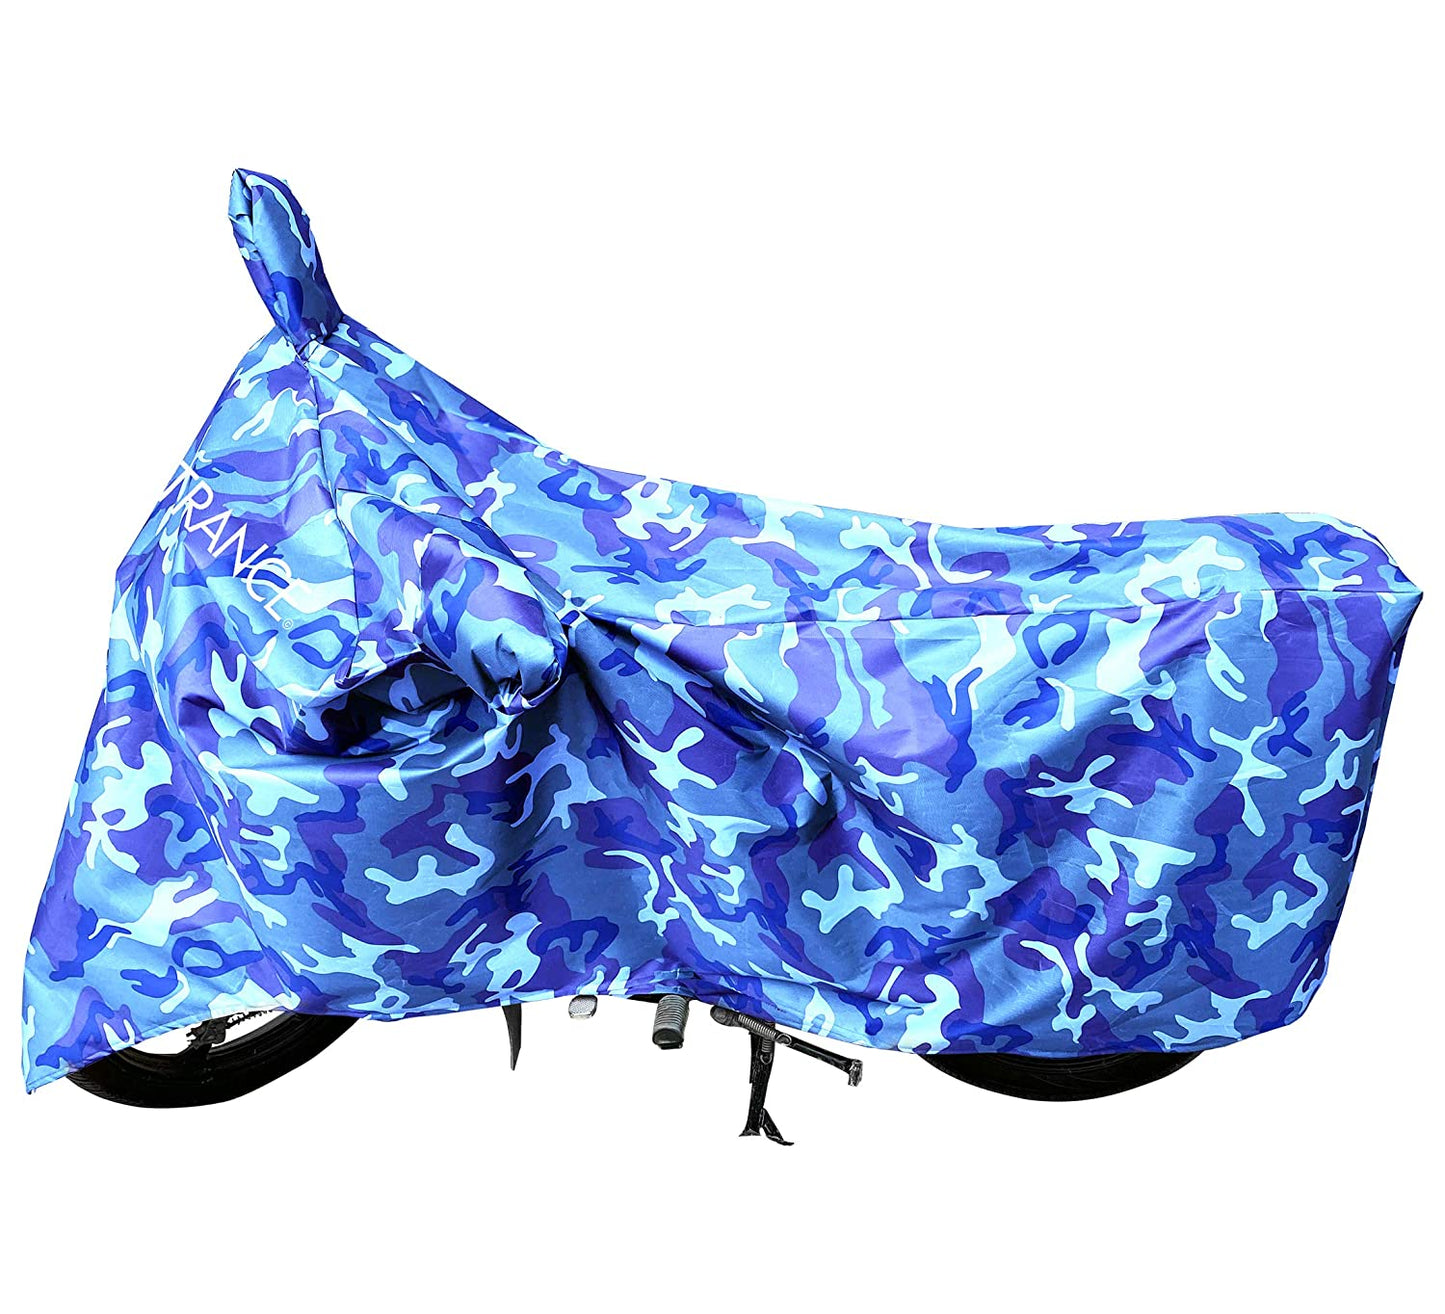 MotoTrance Jungle Bike Body Covers For Honda CB Trigger - Interlock-Stitched Waterproof and Heat Resistant with Mirror Pockets